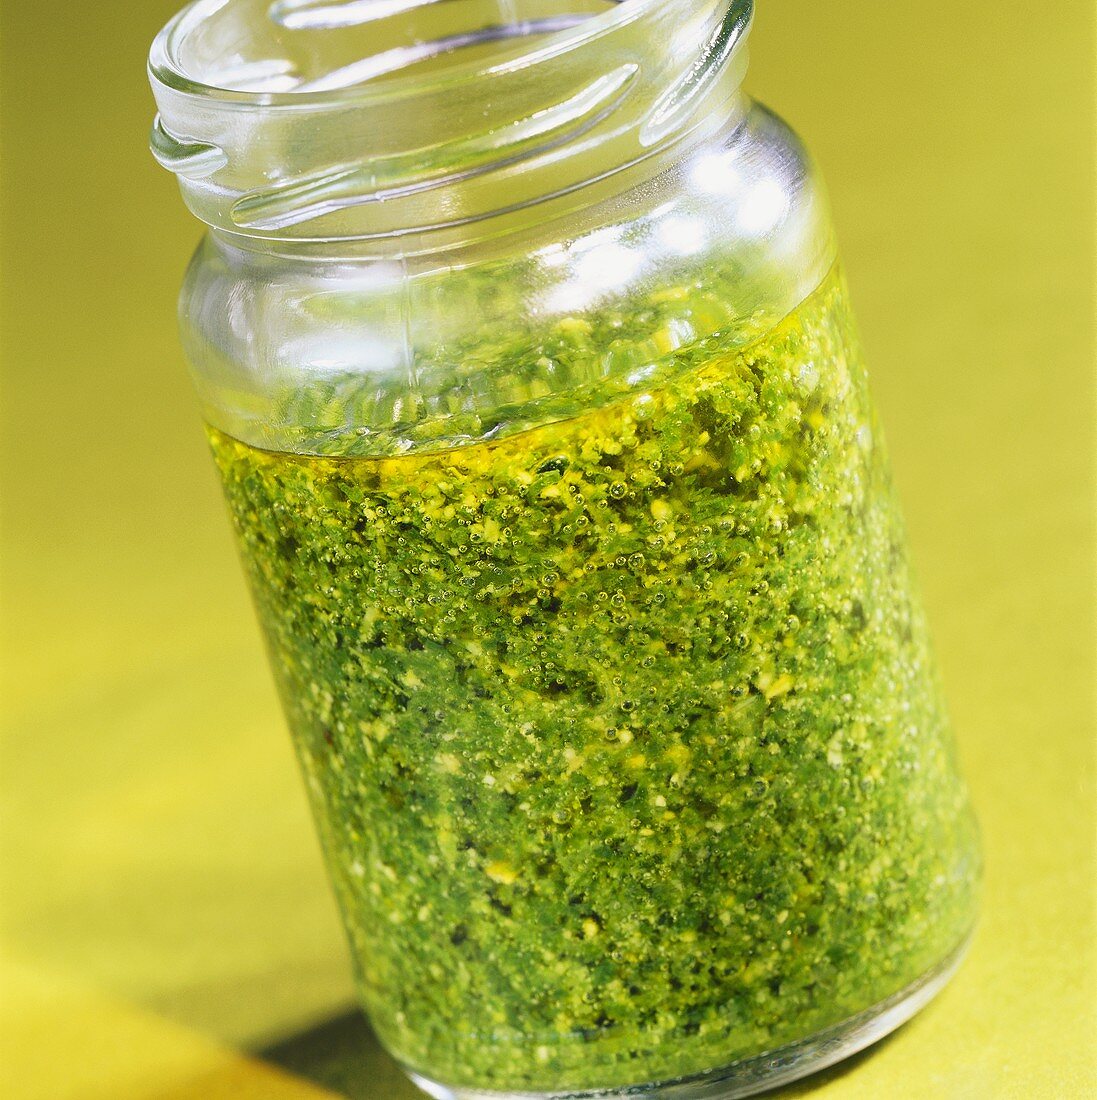 Pesto in an open jar on pale green background